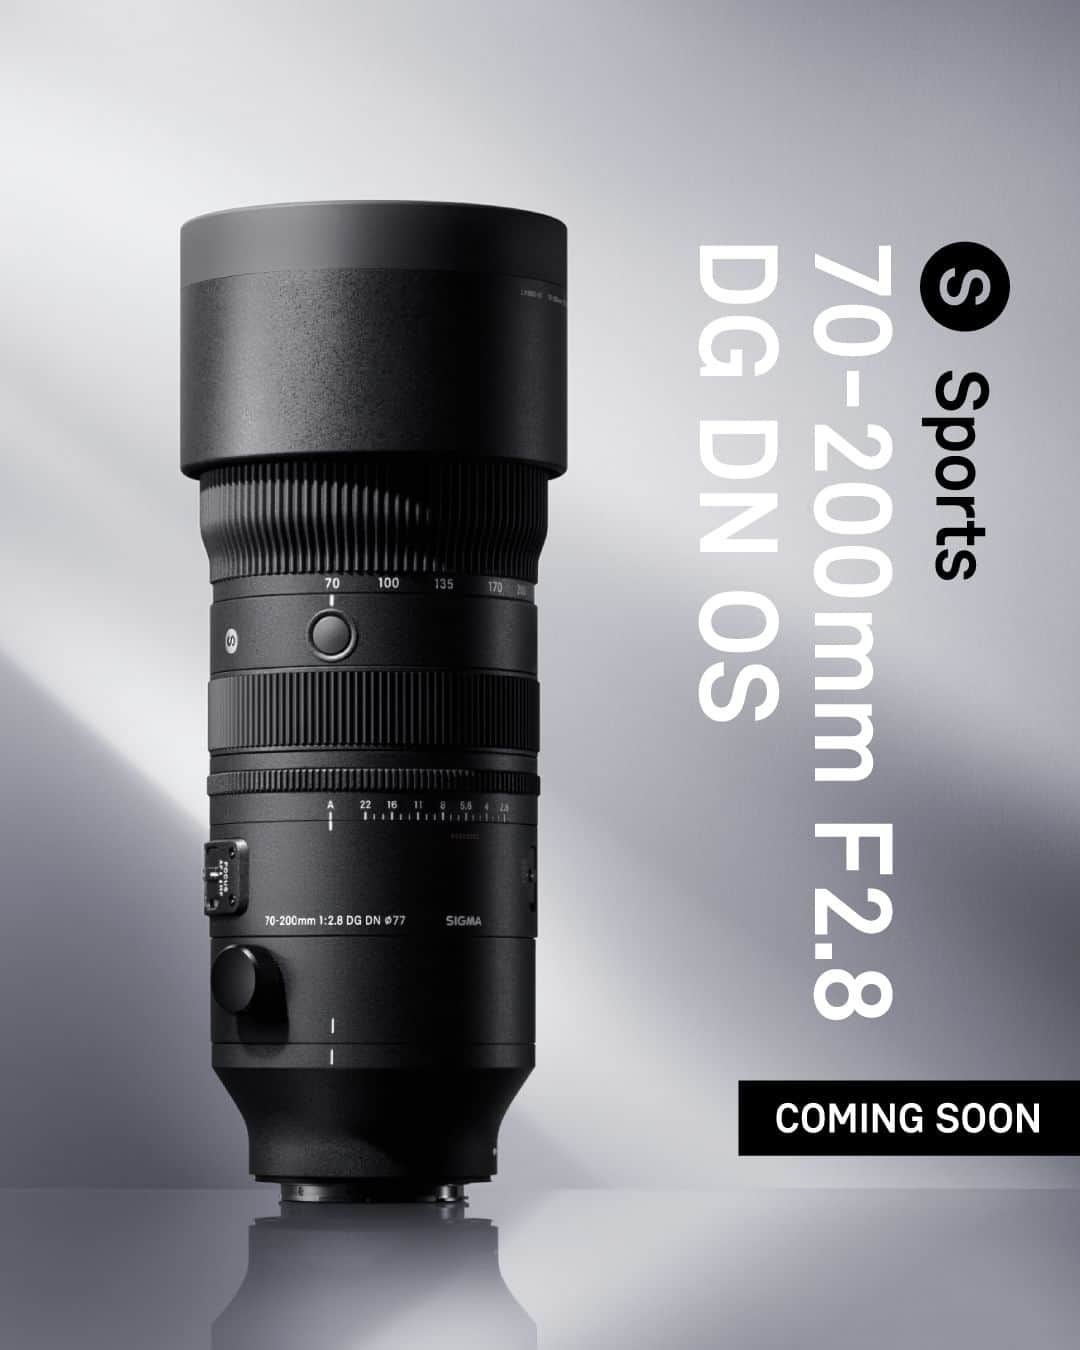 Sigma Corp Of America（シグマ）のインスタグラム：「COMING SOON: The SIGMA 70-200mm F2.8 DG DN OS | Sports, a premium, large-aperture zoom lens for full-frame mirrorless cameras. In addition to the expressive imaging capabilities thanks to the latest optical design, this lens offers a high level of performance and features that meet the expectations of professionals in both still and video, including high-speed autofocus with HLA (High-response Linear Actuator), optical stabilizer with the latest algorithm "OS2", and the superior weather resistance of SIGMA's Sports line. Coming for Sony E-mount & L-Mount.  Check slide 2 for a few official specs, and get ready to put this lens to work in December 2023!  ▶️ LINK IN OUR BIO ◀️ to learn more, or go to:  🔗 bit.ly/sigma-70-200mm-nov-fb  #SIGMA #SIGMA70200mmSports #SIGMASports #SIGMADGDN #sigmaphoto #sigmalens #sigmalenses #photography #telephotolens #zoomlens #Emount #Lmount #mirrorless #fullframe #newproduct #comingsoon」